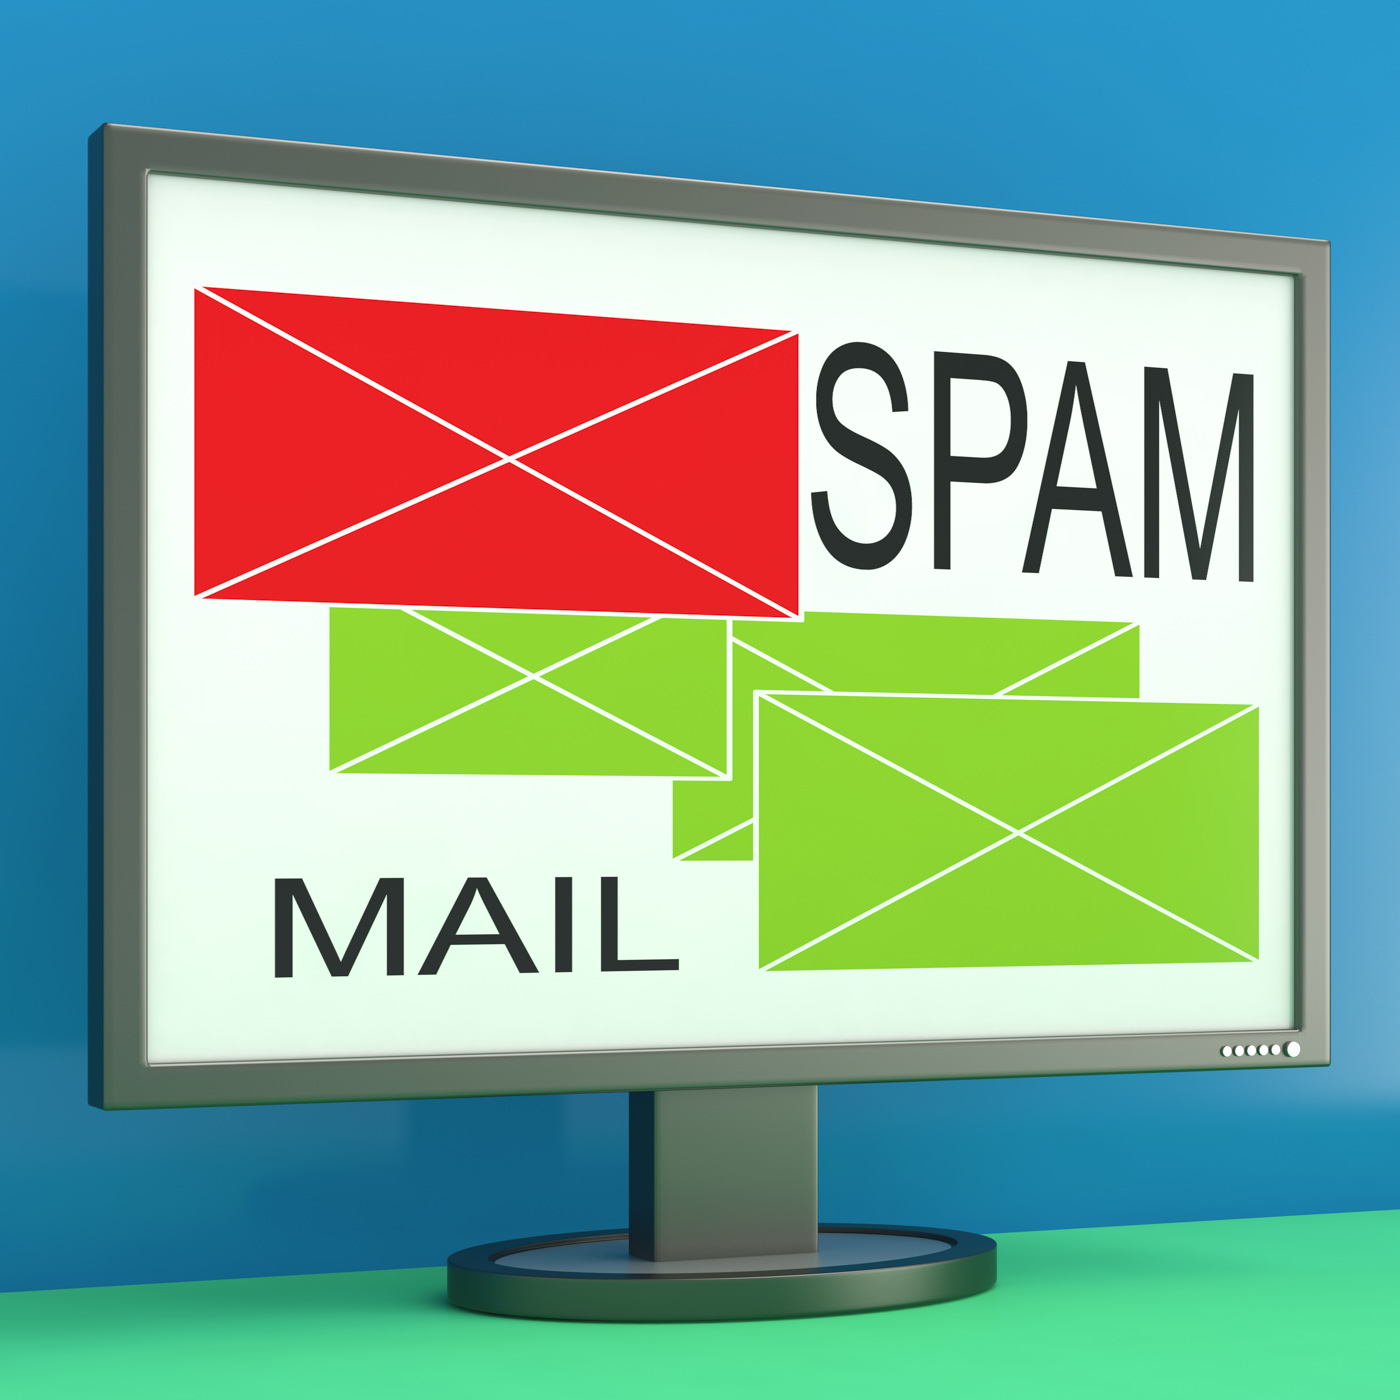 Spam And Mail Envelopes On Monitor Shows Online Security, Accepted, Monitor, Unsolicited, Spamming, HQ Photo